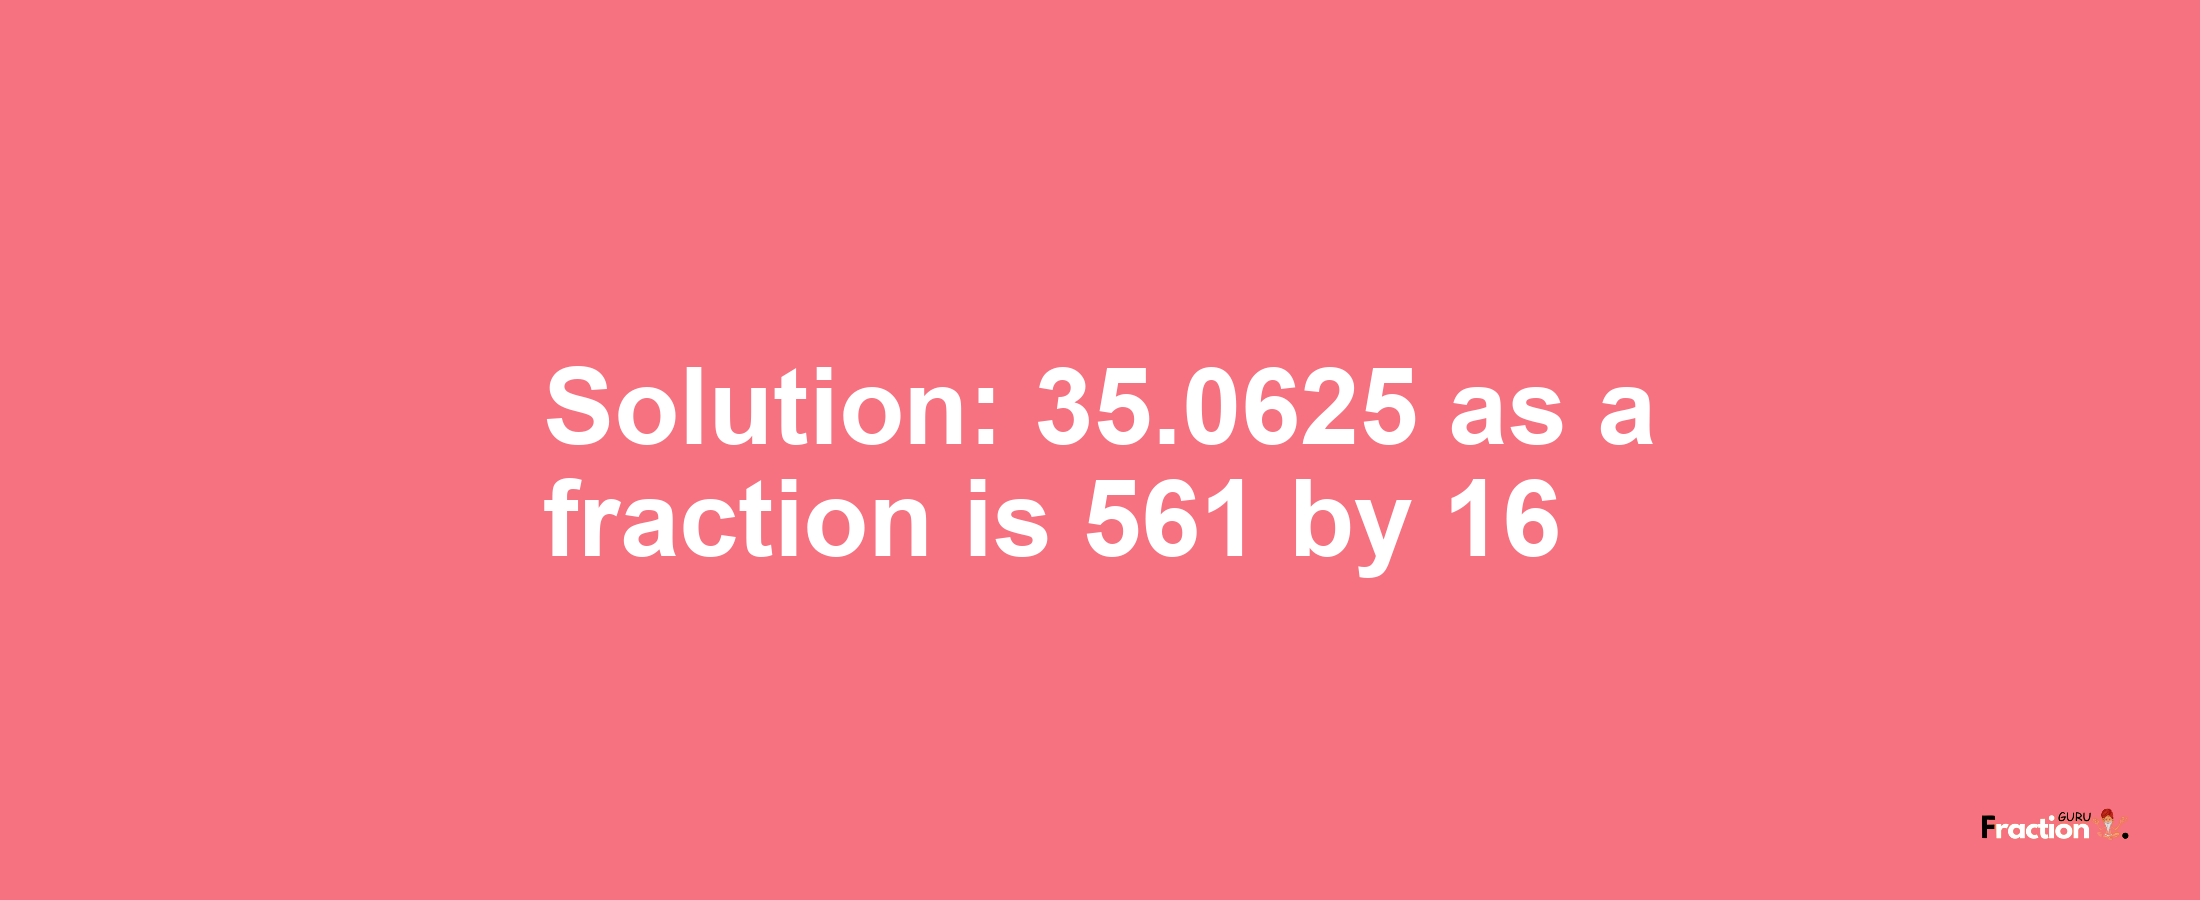 Solution:35.0625 as a fraction is 561/16